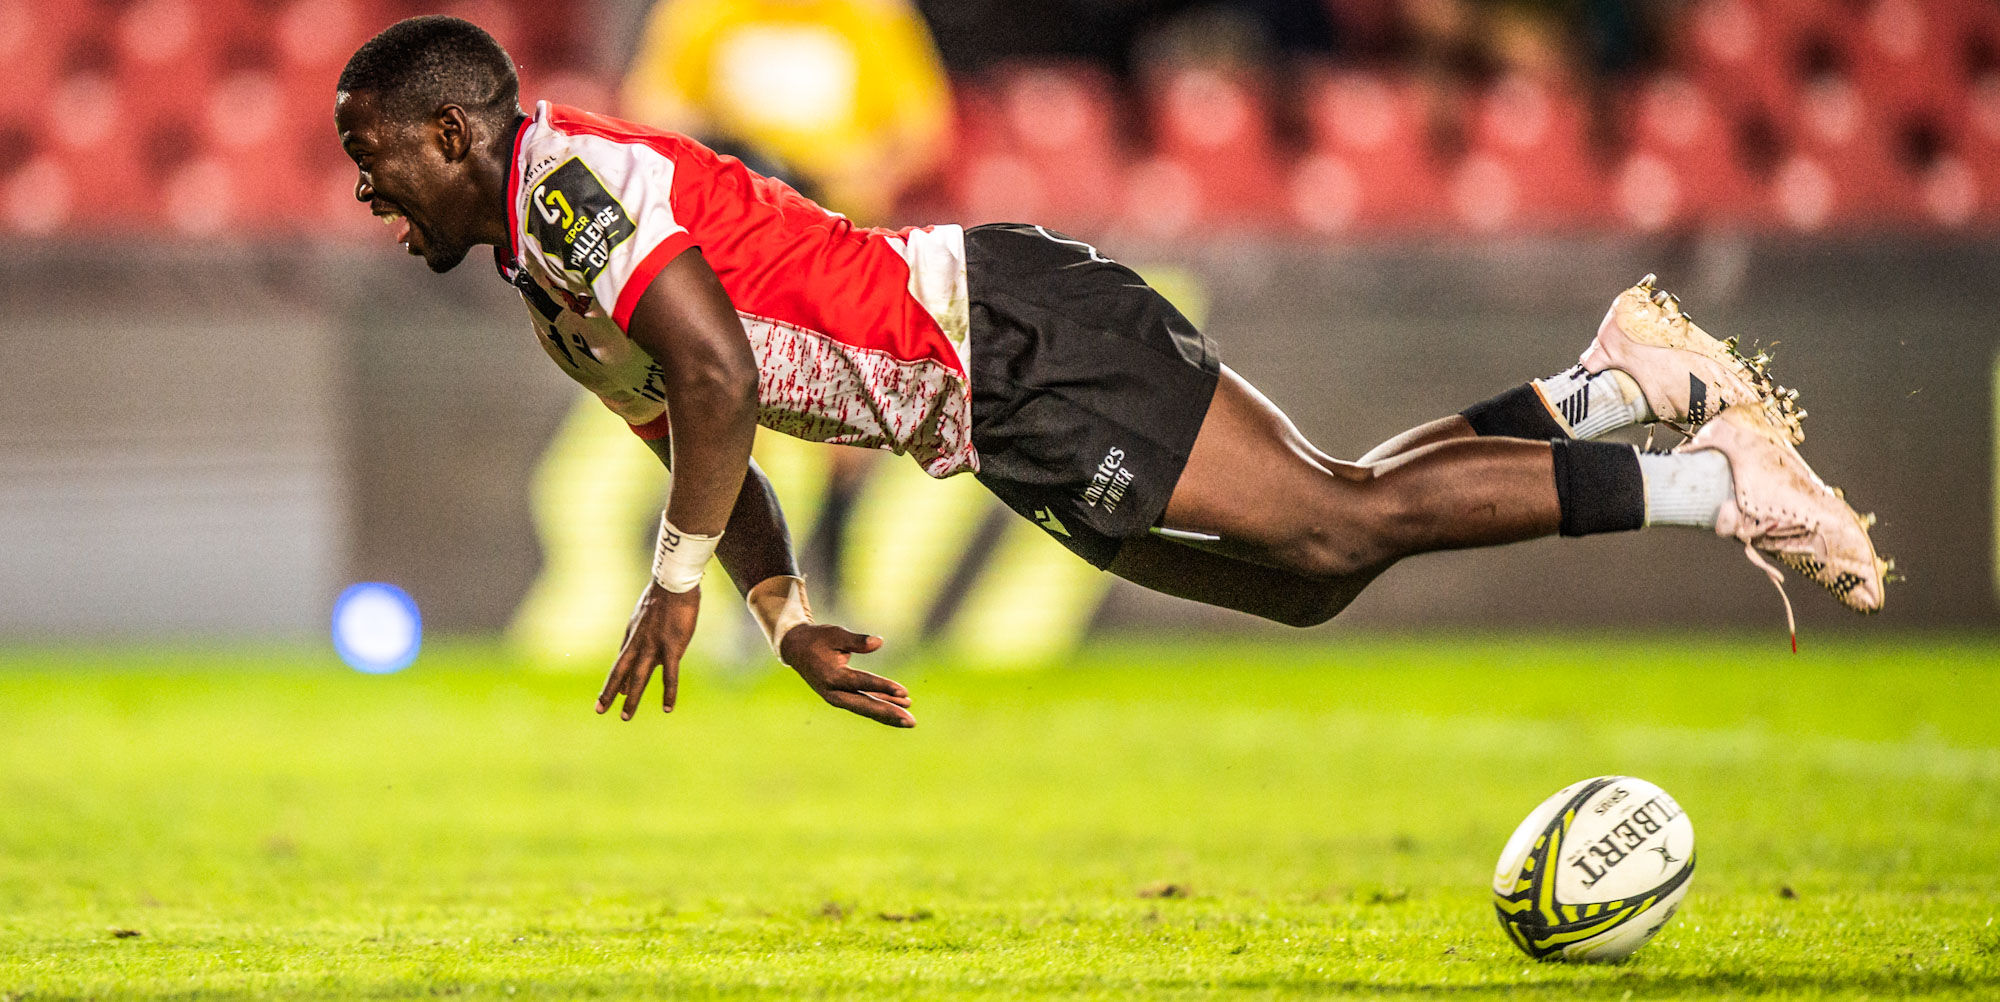 JOHANNESBURG, SOUTH AFRICA - APRIL 01: Sanele Nohamba of the Emirates Lions scoring his try during the EPCR Challenge Cup, round of 16 match between Emirates Lions and Racing 92 at Emirates Airline Park on April 01, 2023 in Johannesburg, South Africa. (Photo by Christiaan Kotze/Gallo Images)